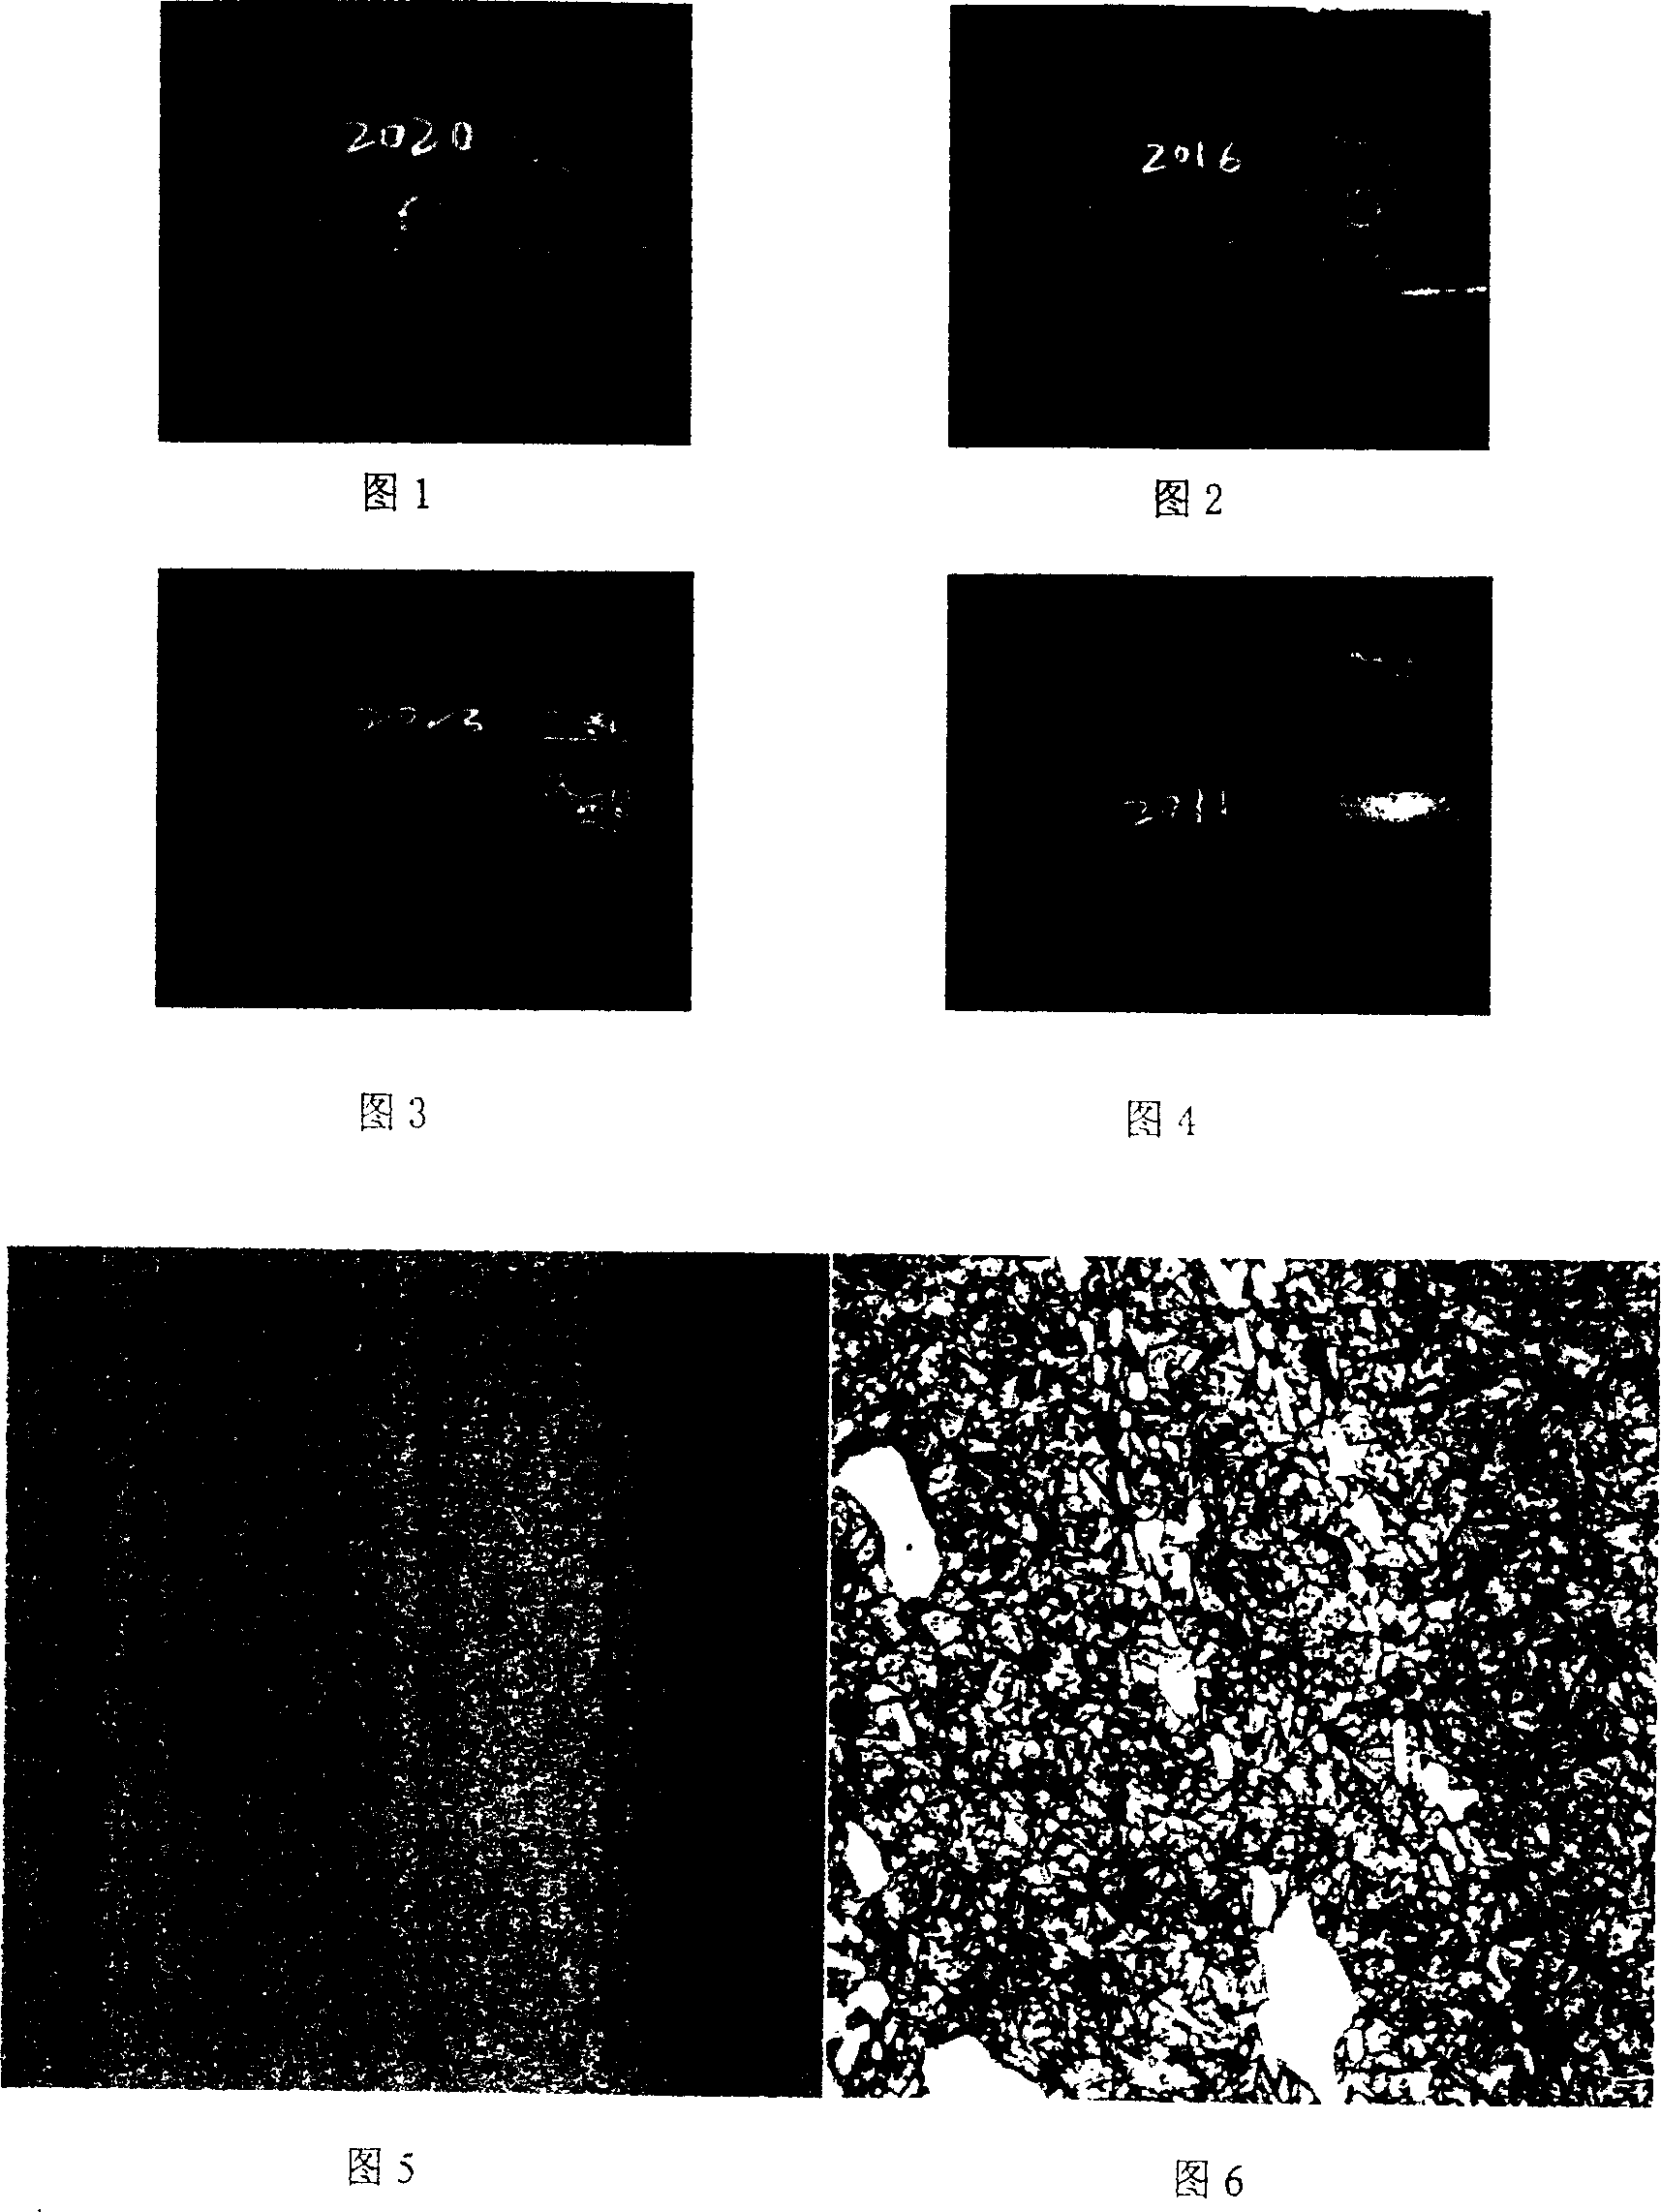 Method for detecting retained austenite and under-tempering by using Rockwell and Leeb hardness contrast method